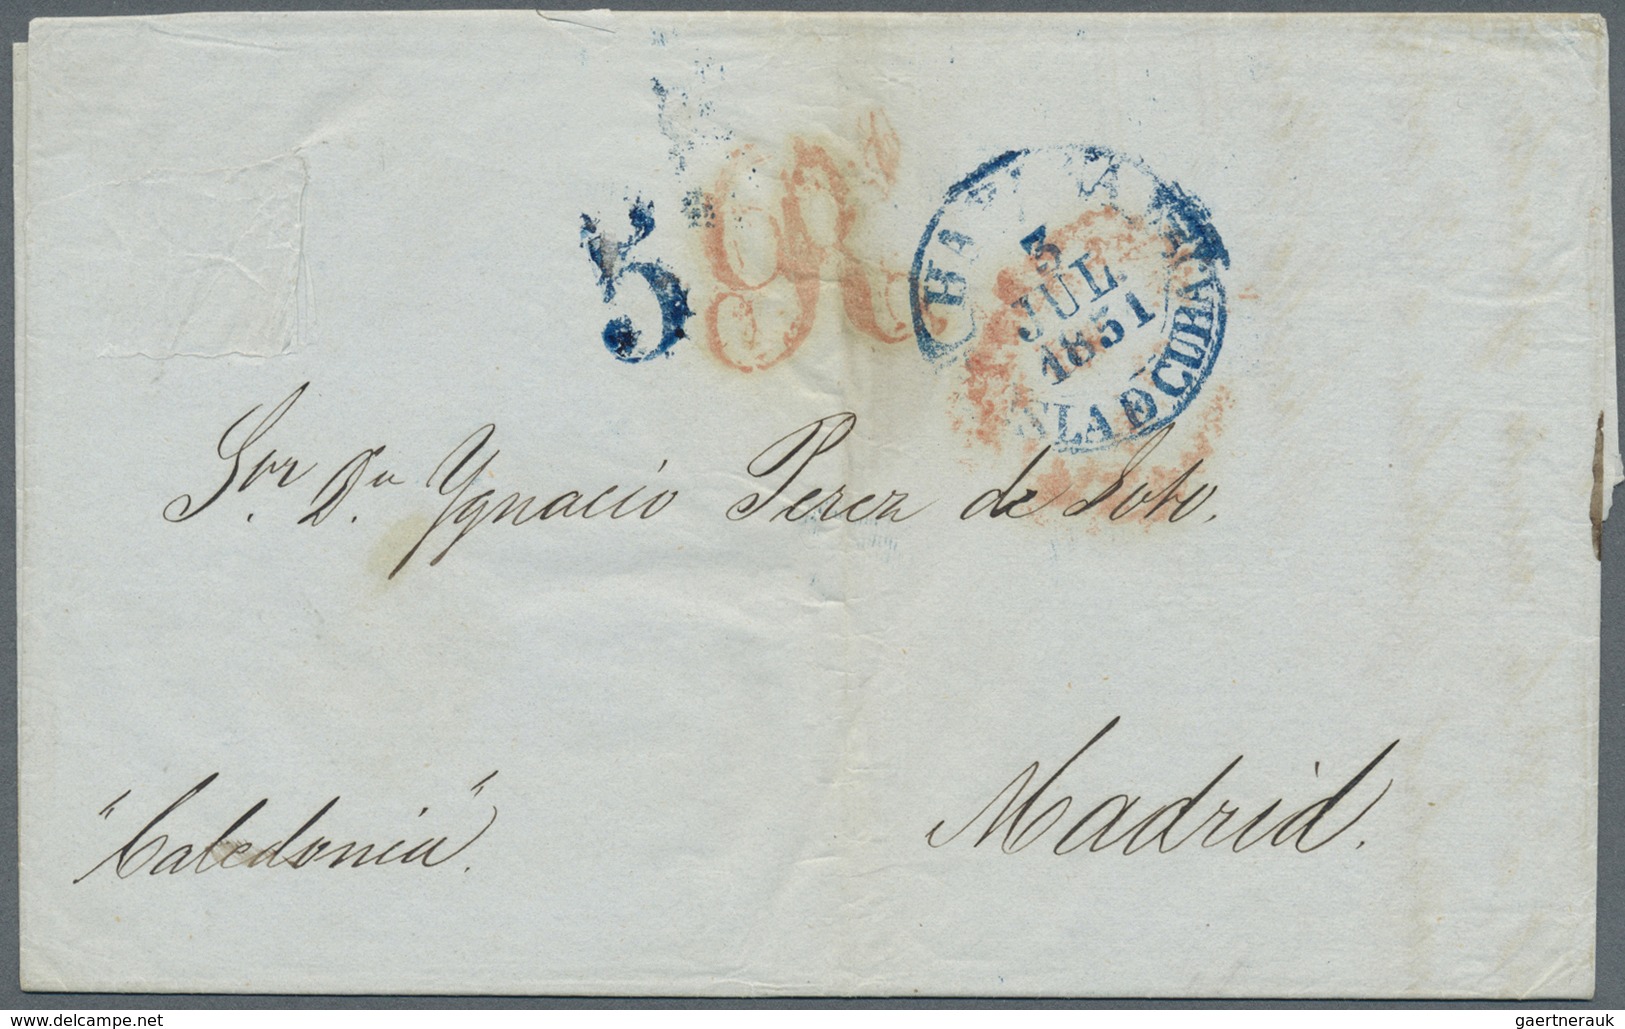 Br/GA/ Cuba: 1840 - 1968 (ca.), lot of 136 items with many better ones, including interesting cancellations